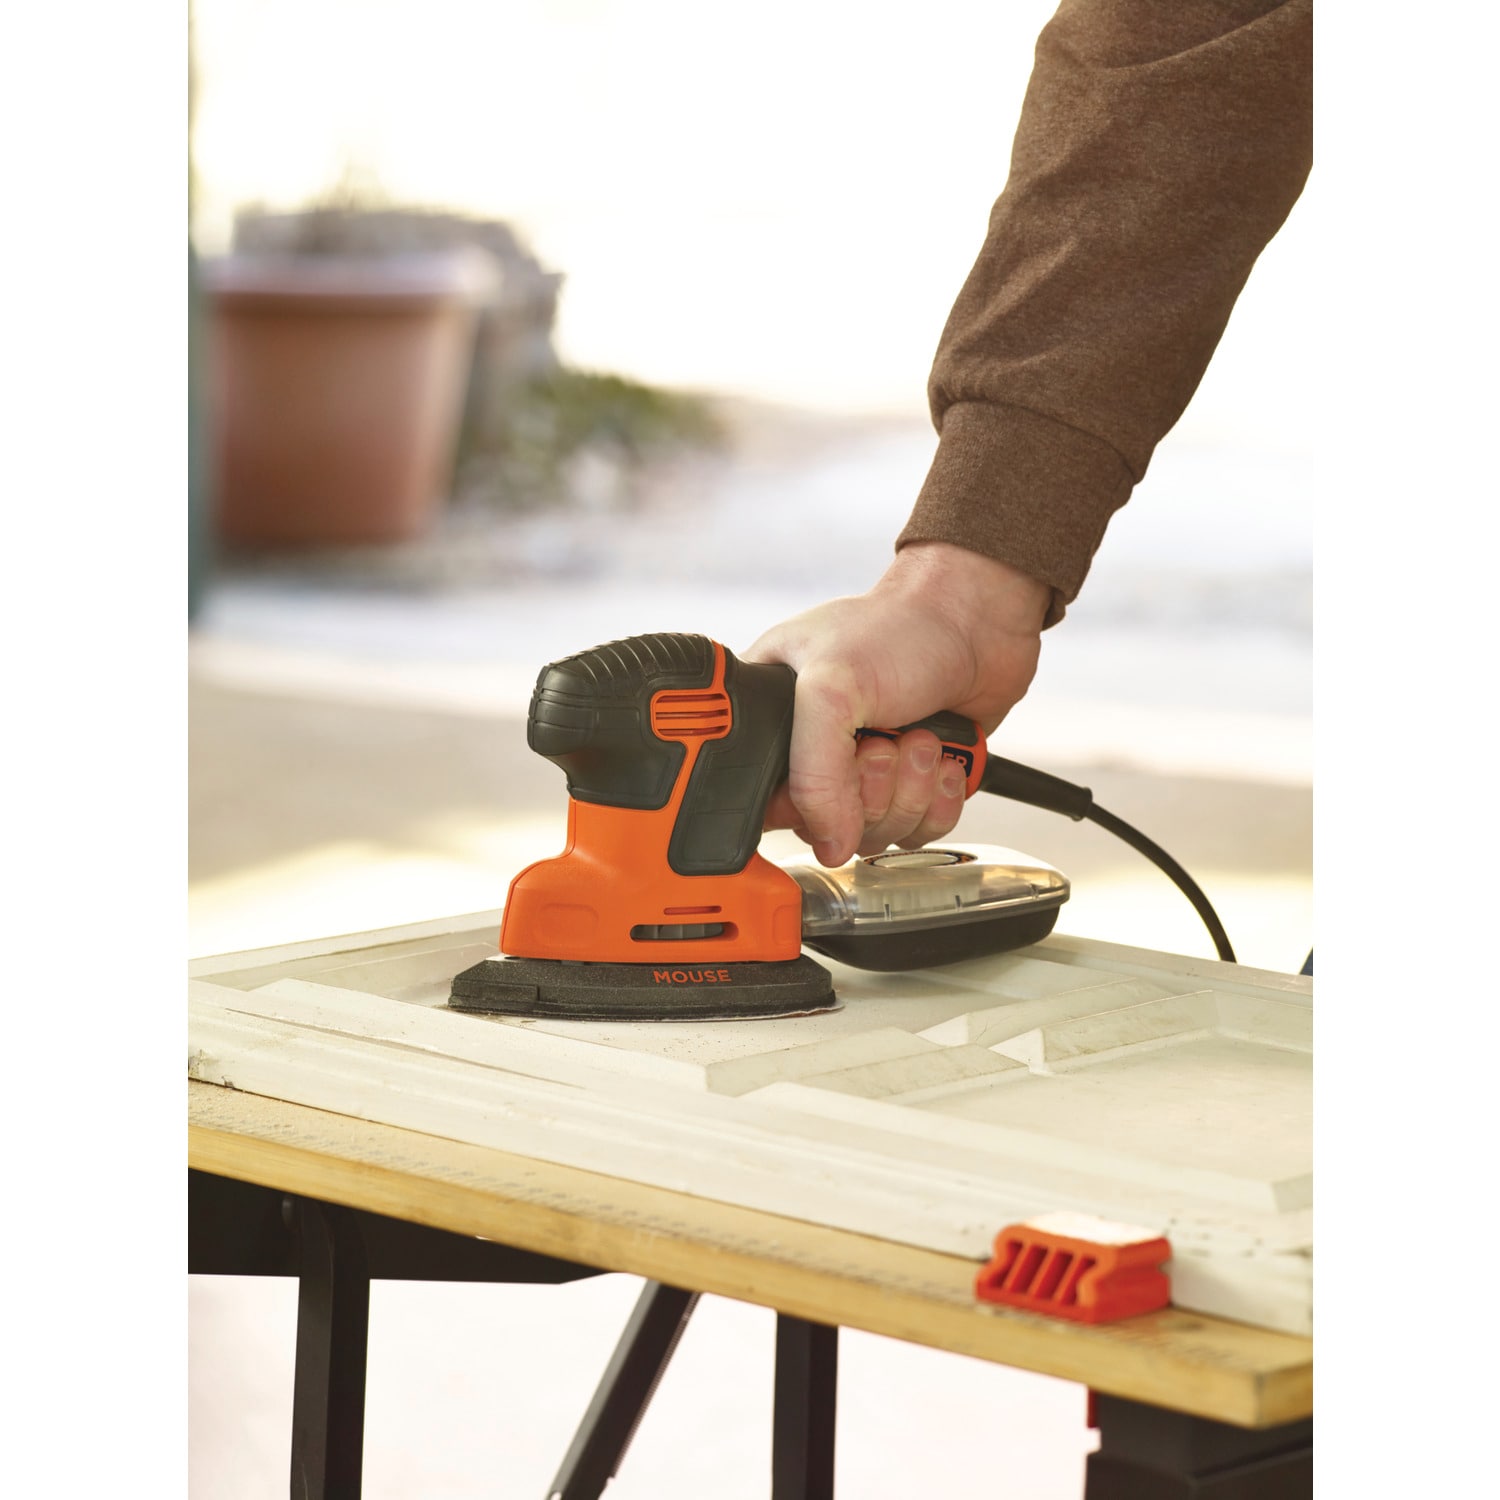 BLACK+DECKER 1.2-Amp Corded Detail Sander with Dust Management the Power Sanders department at Lowes.com